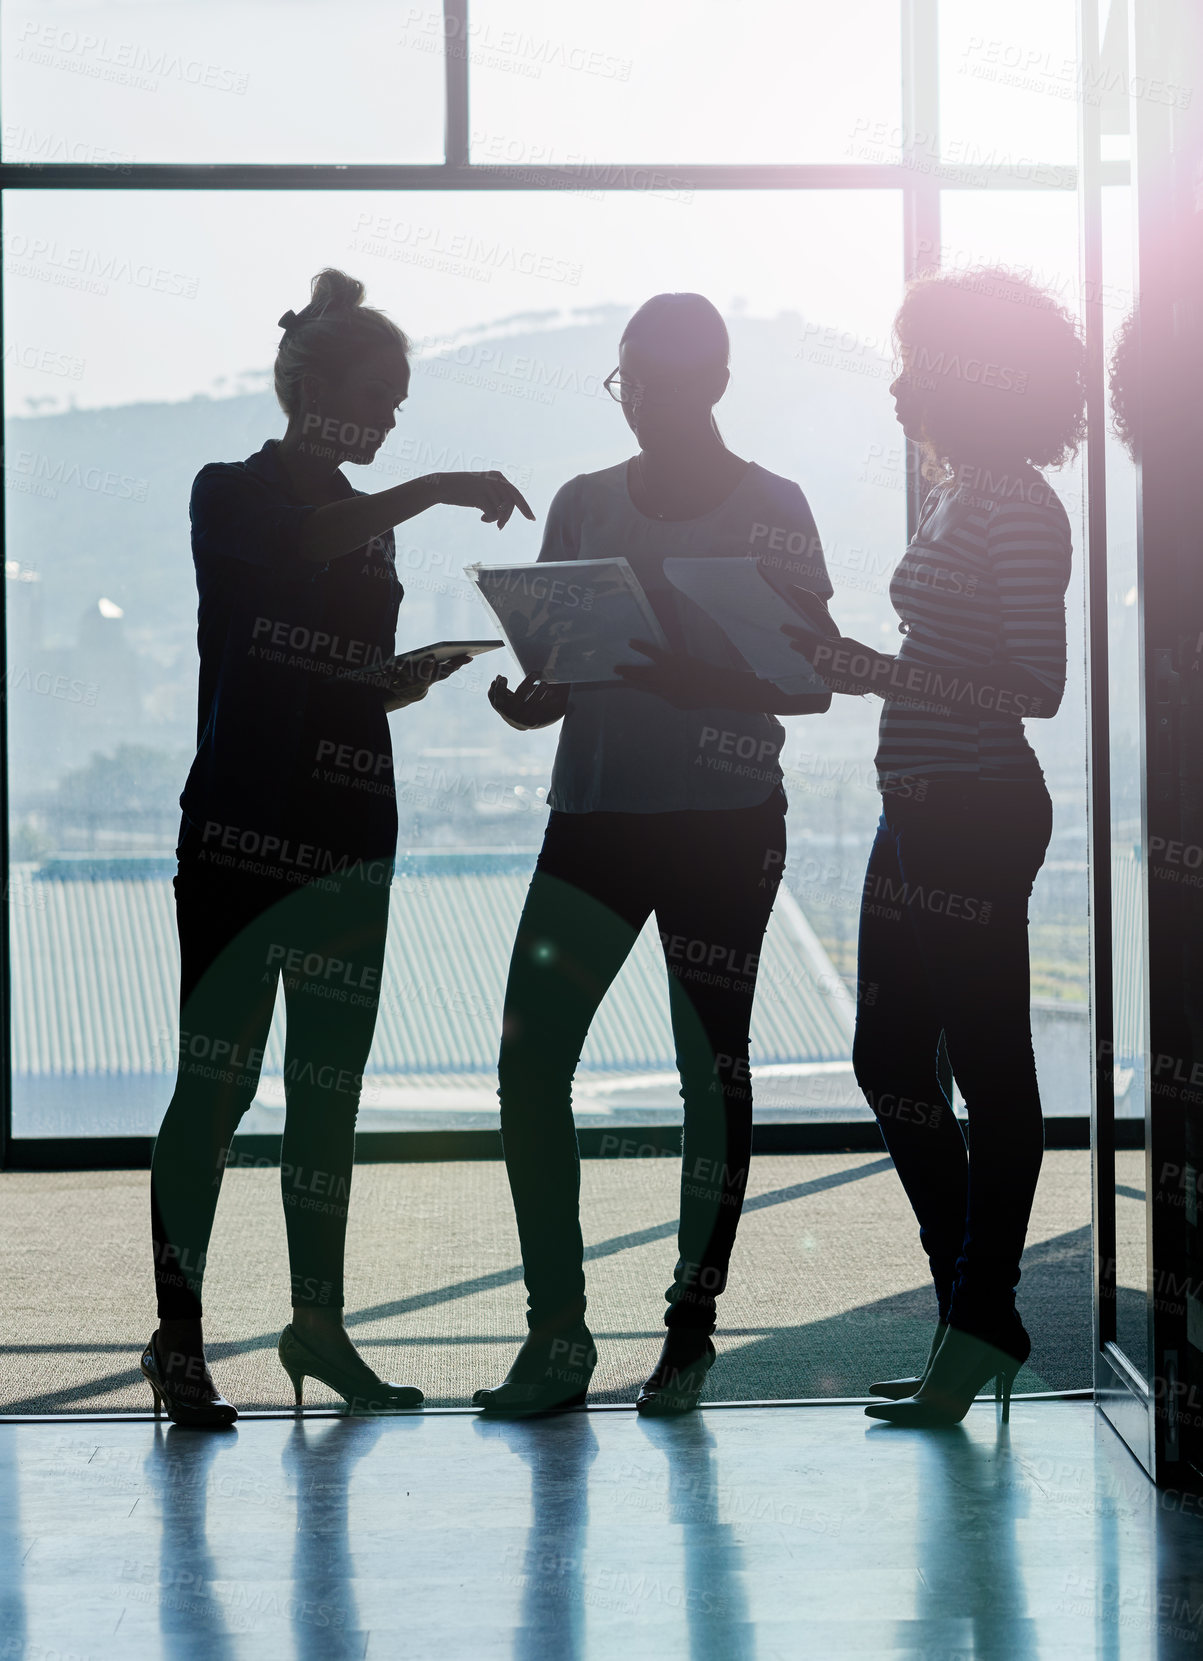 Buy stock photo Silhouette shot of female coworkers talking while standing in front of a window in an office